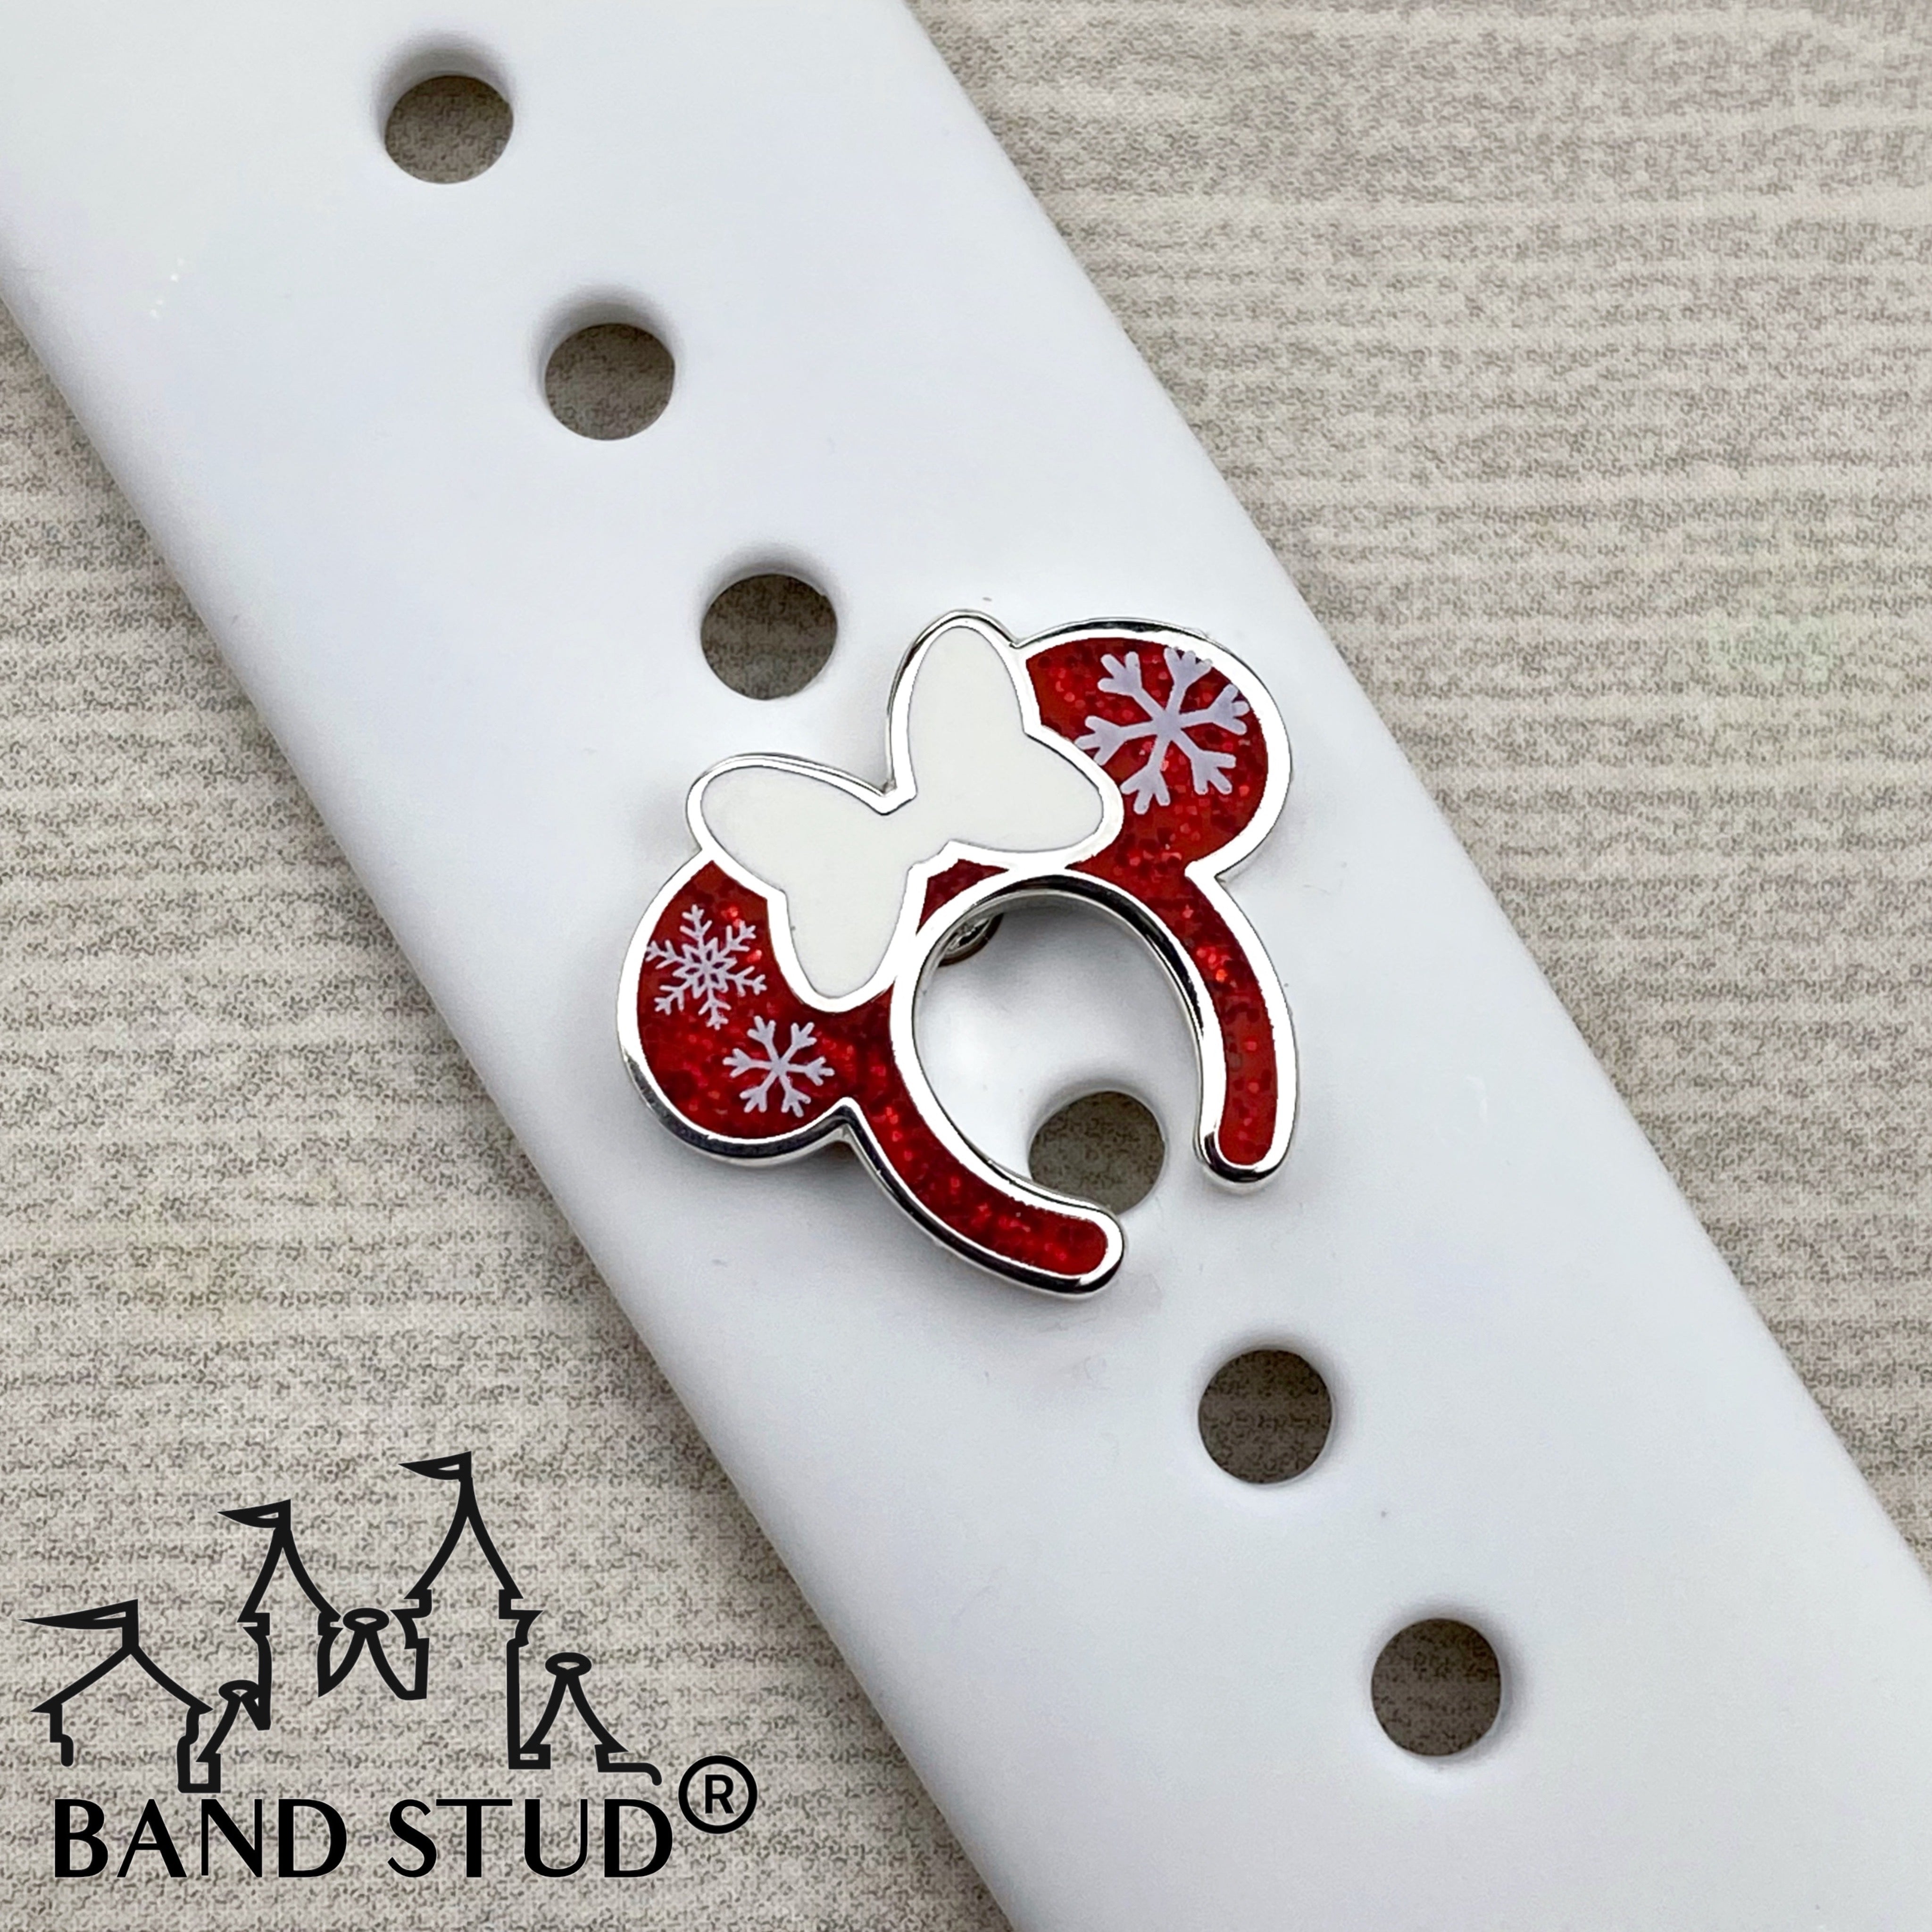 Band Stud® - Christmas Collection - Miss Mouse Ears Snowflakes